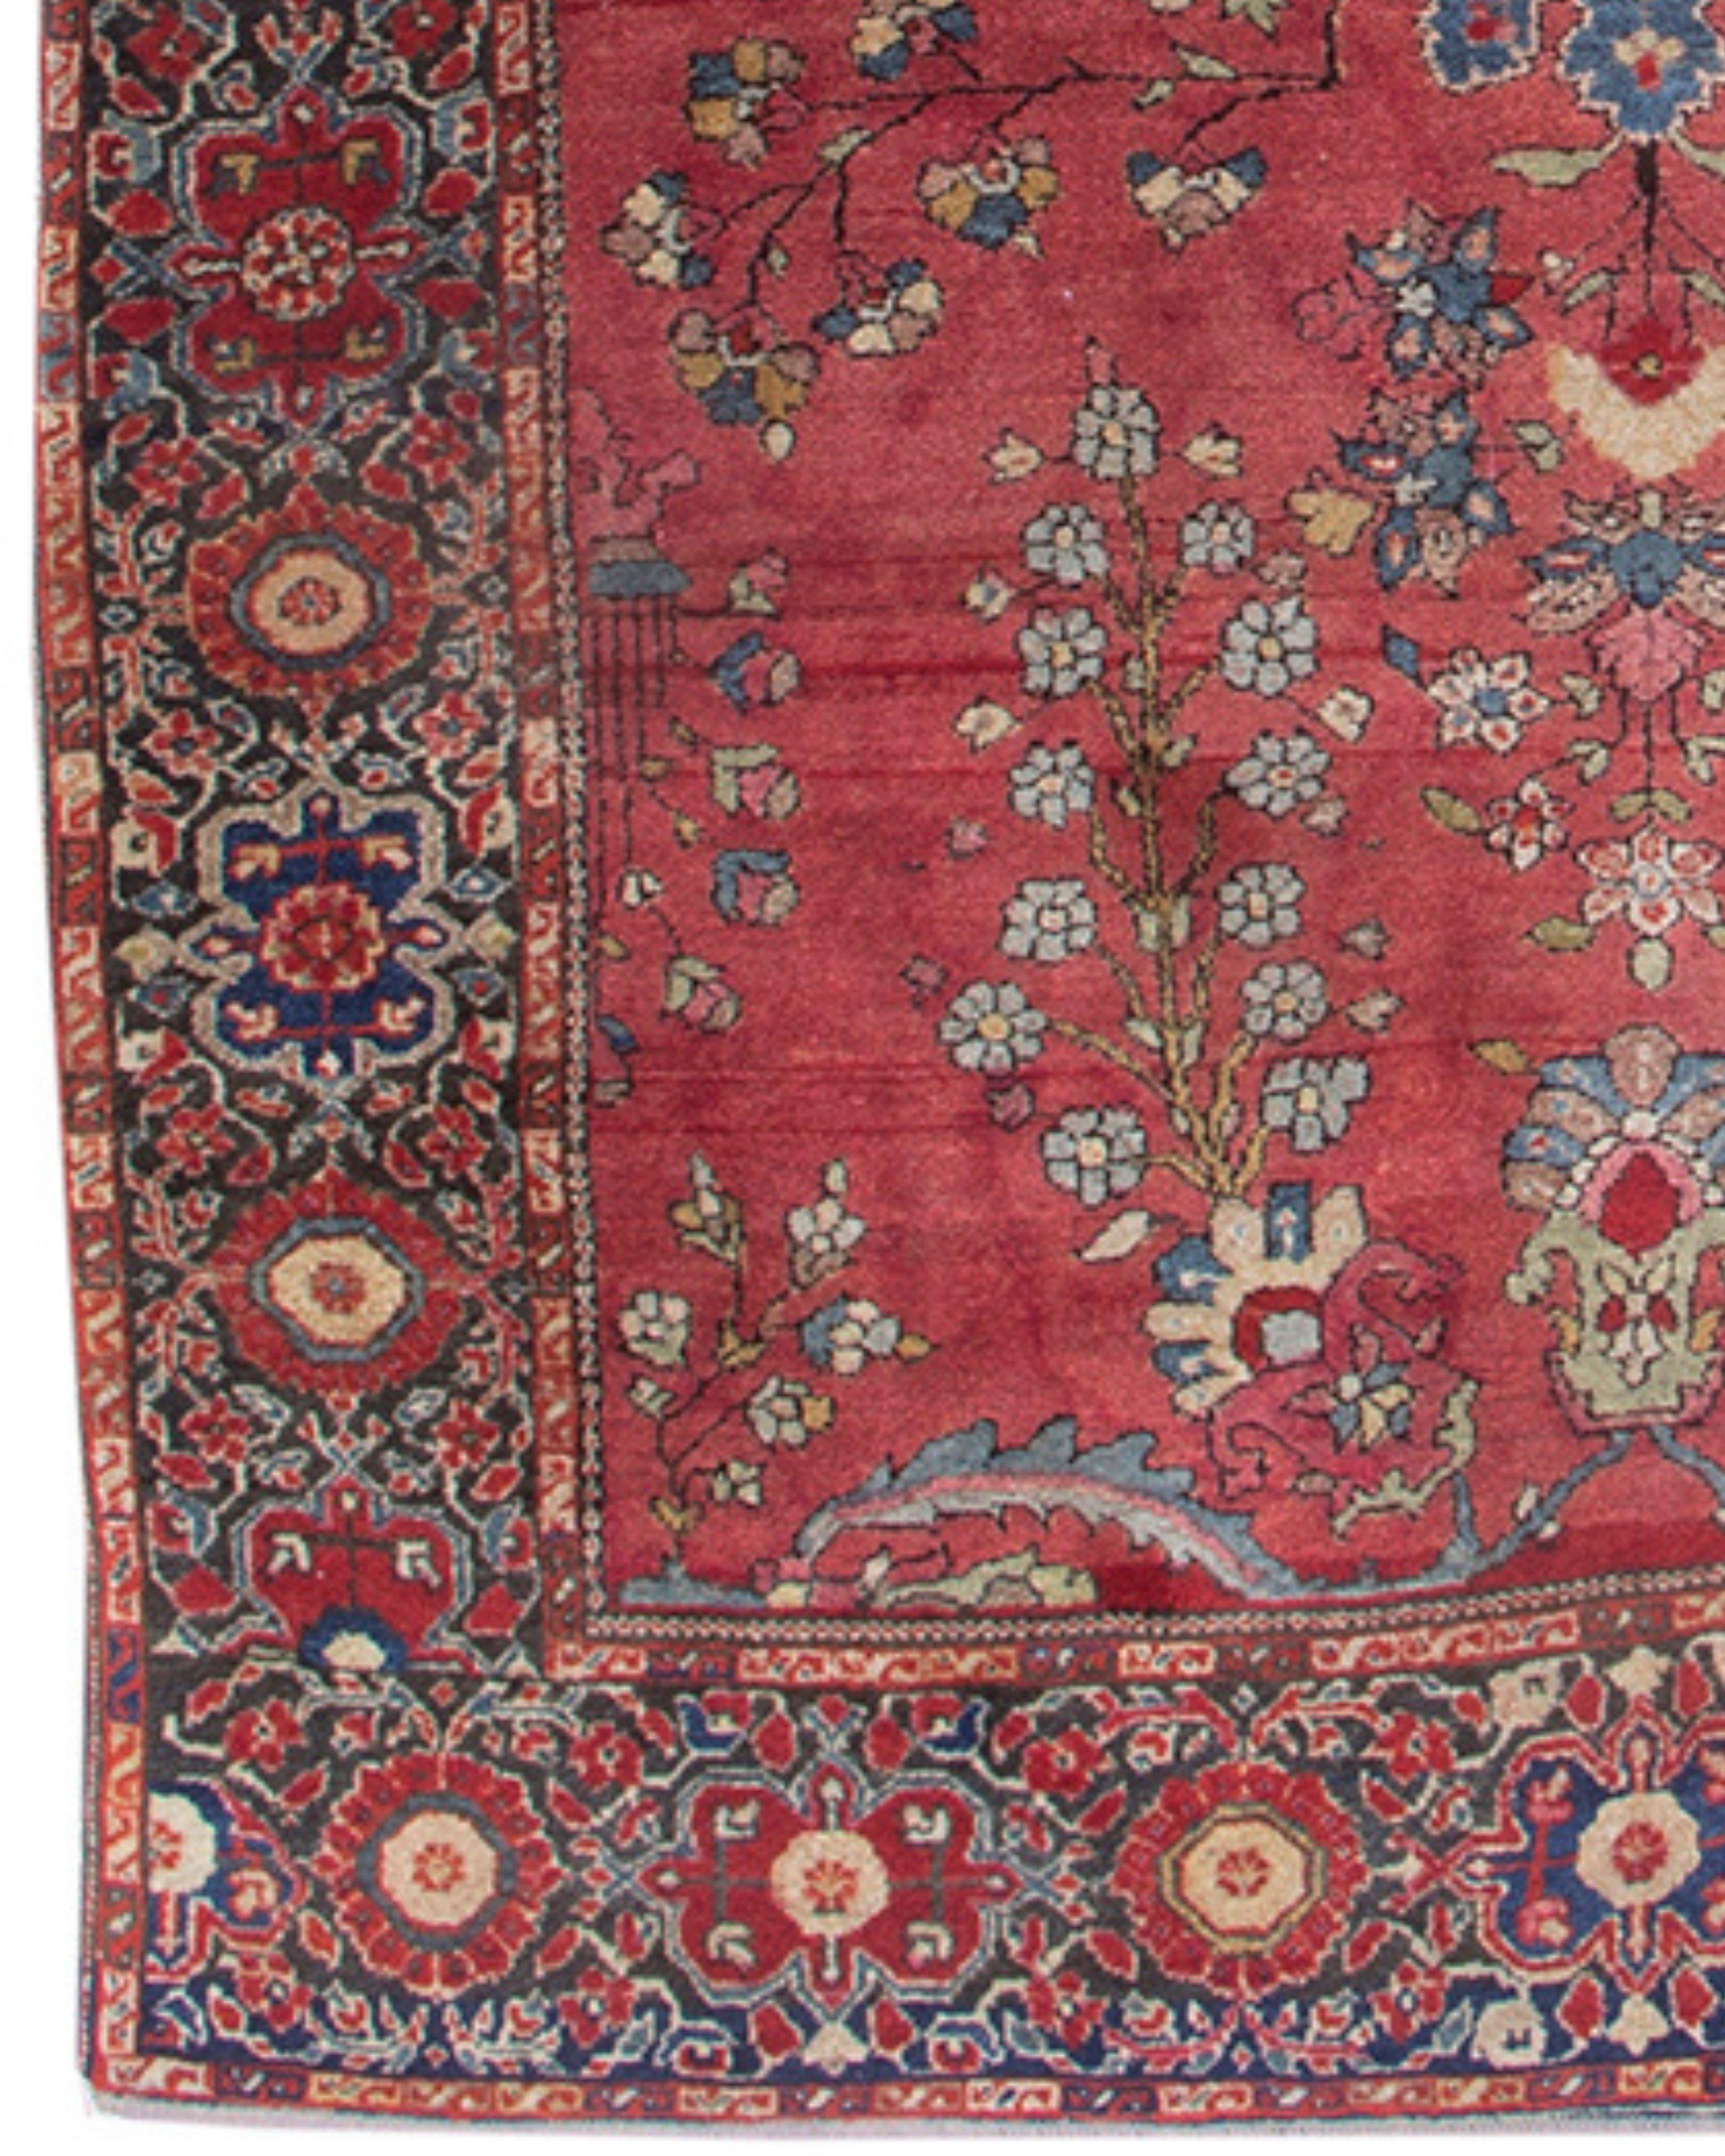 Antique Persian Fereghan Sarouk Rug, Early 20th Century In Excellent Condition For Sale In San Francisco, CA